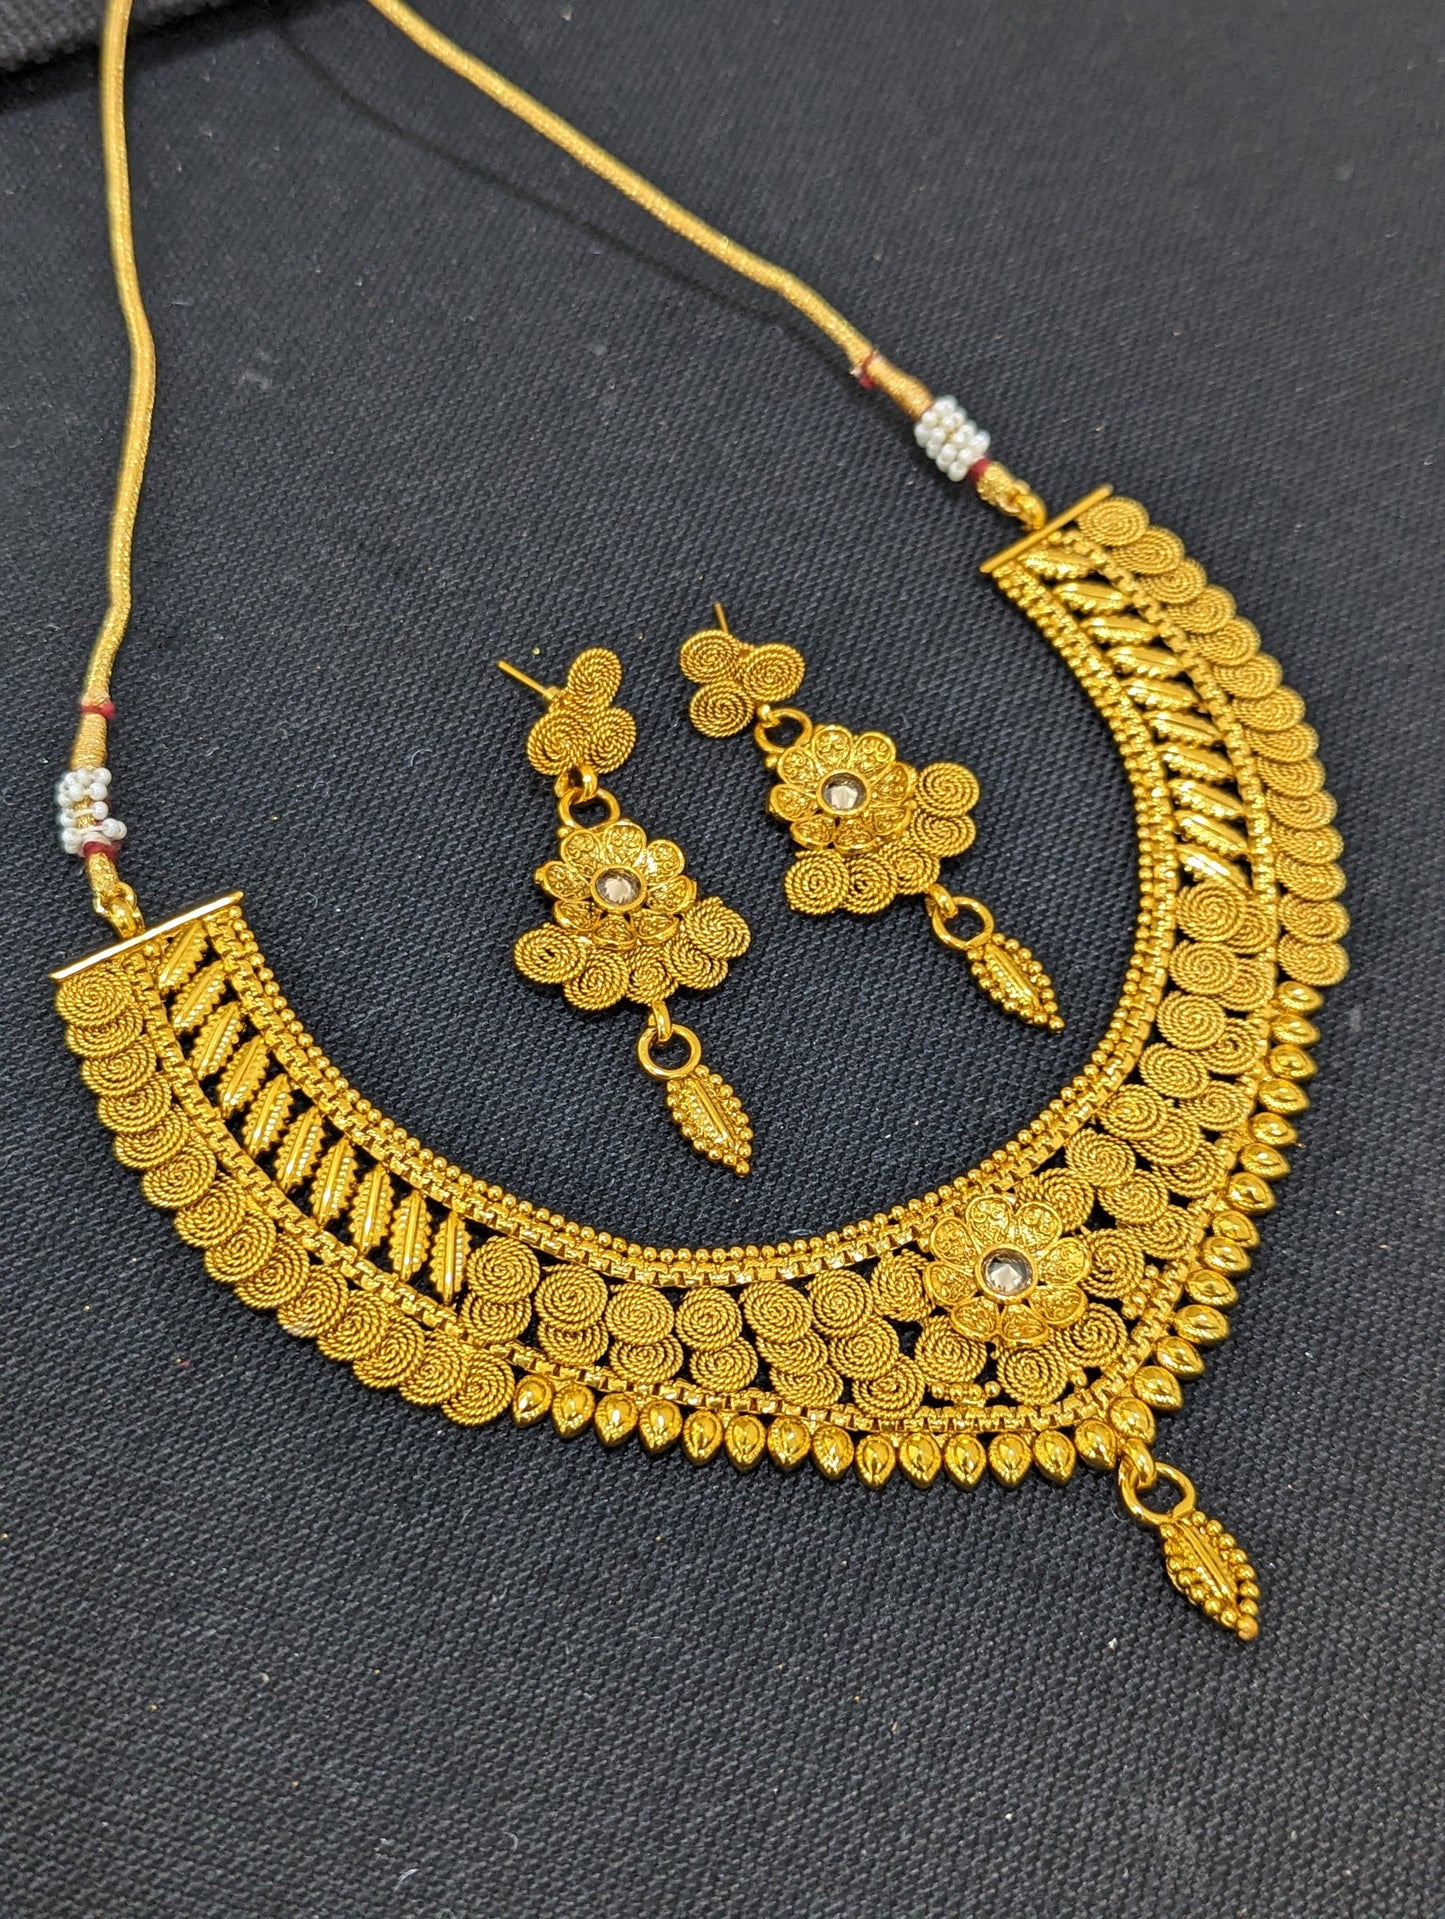 Real gold replica design Choker Necklace and Earrings set - Design 3